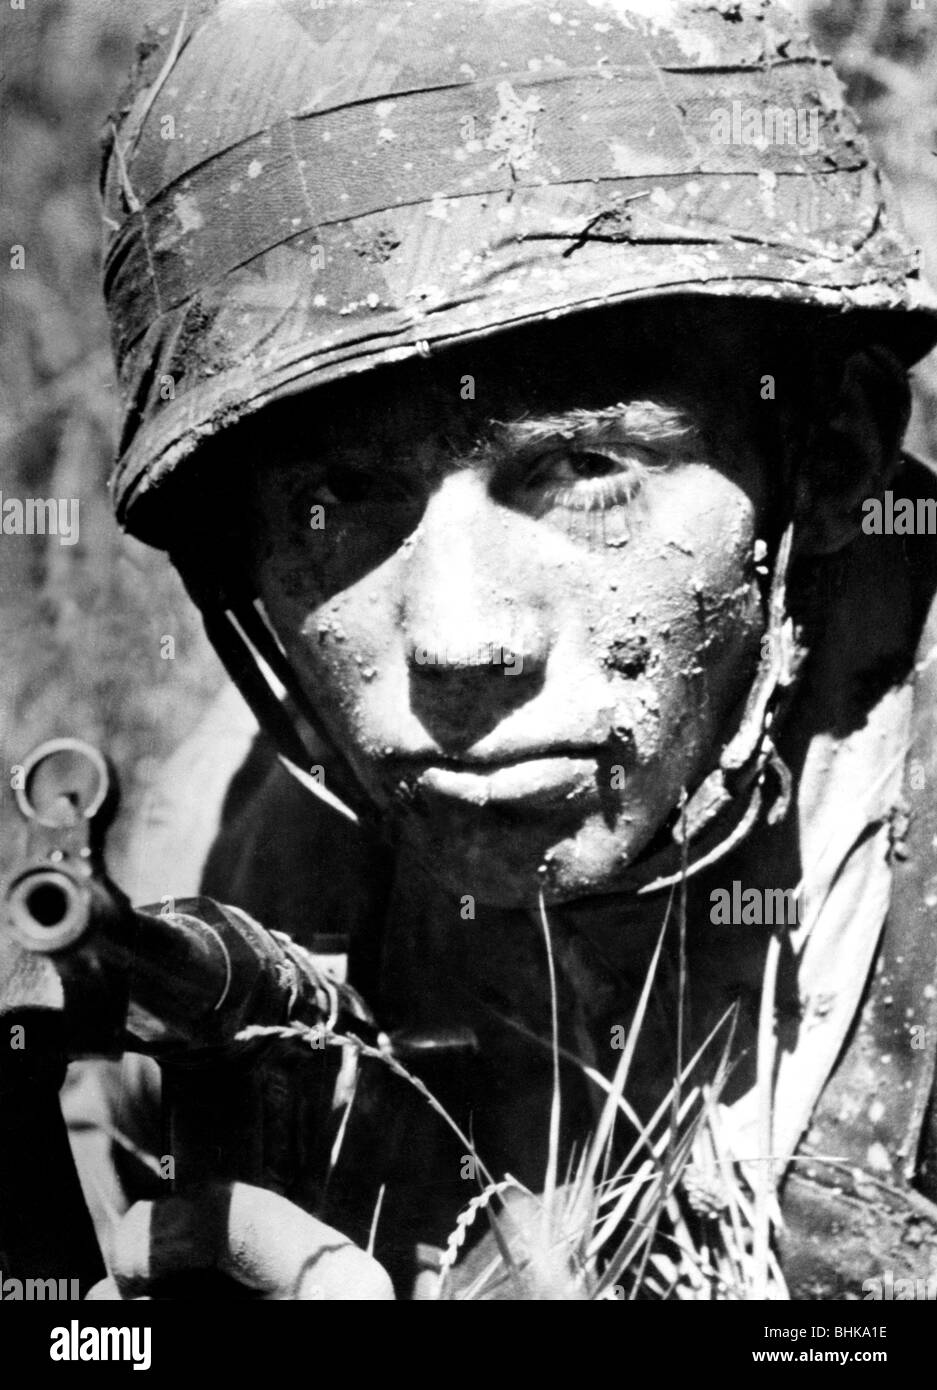 events, Second World War / WWII, German Wehrmacht, portrait of a paratrooper, circa 1943, Stock Photo